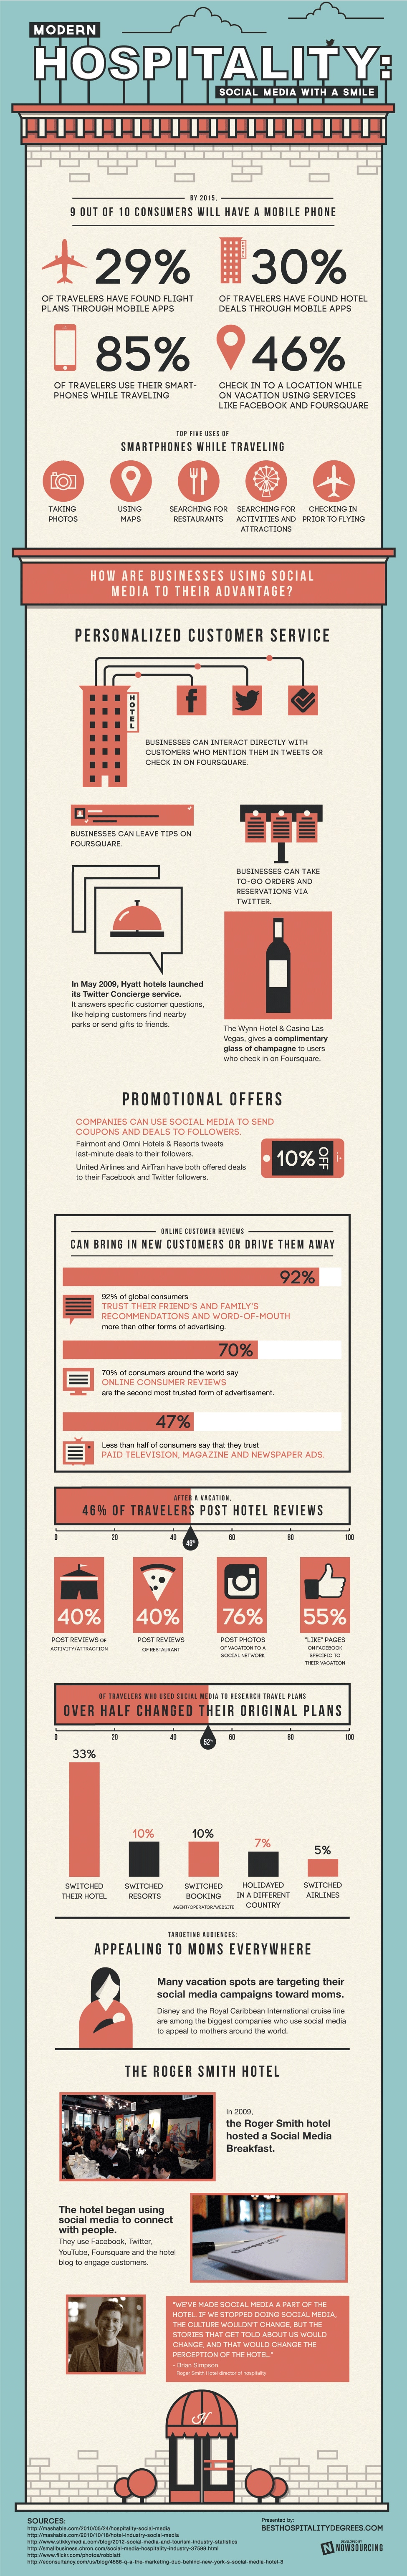 How Social Media Customer Service Could Evolve By 2015 [Infographic]